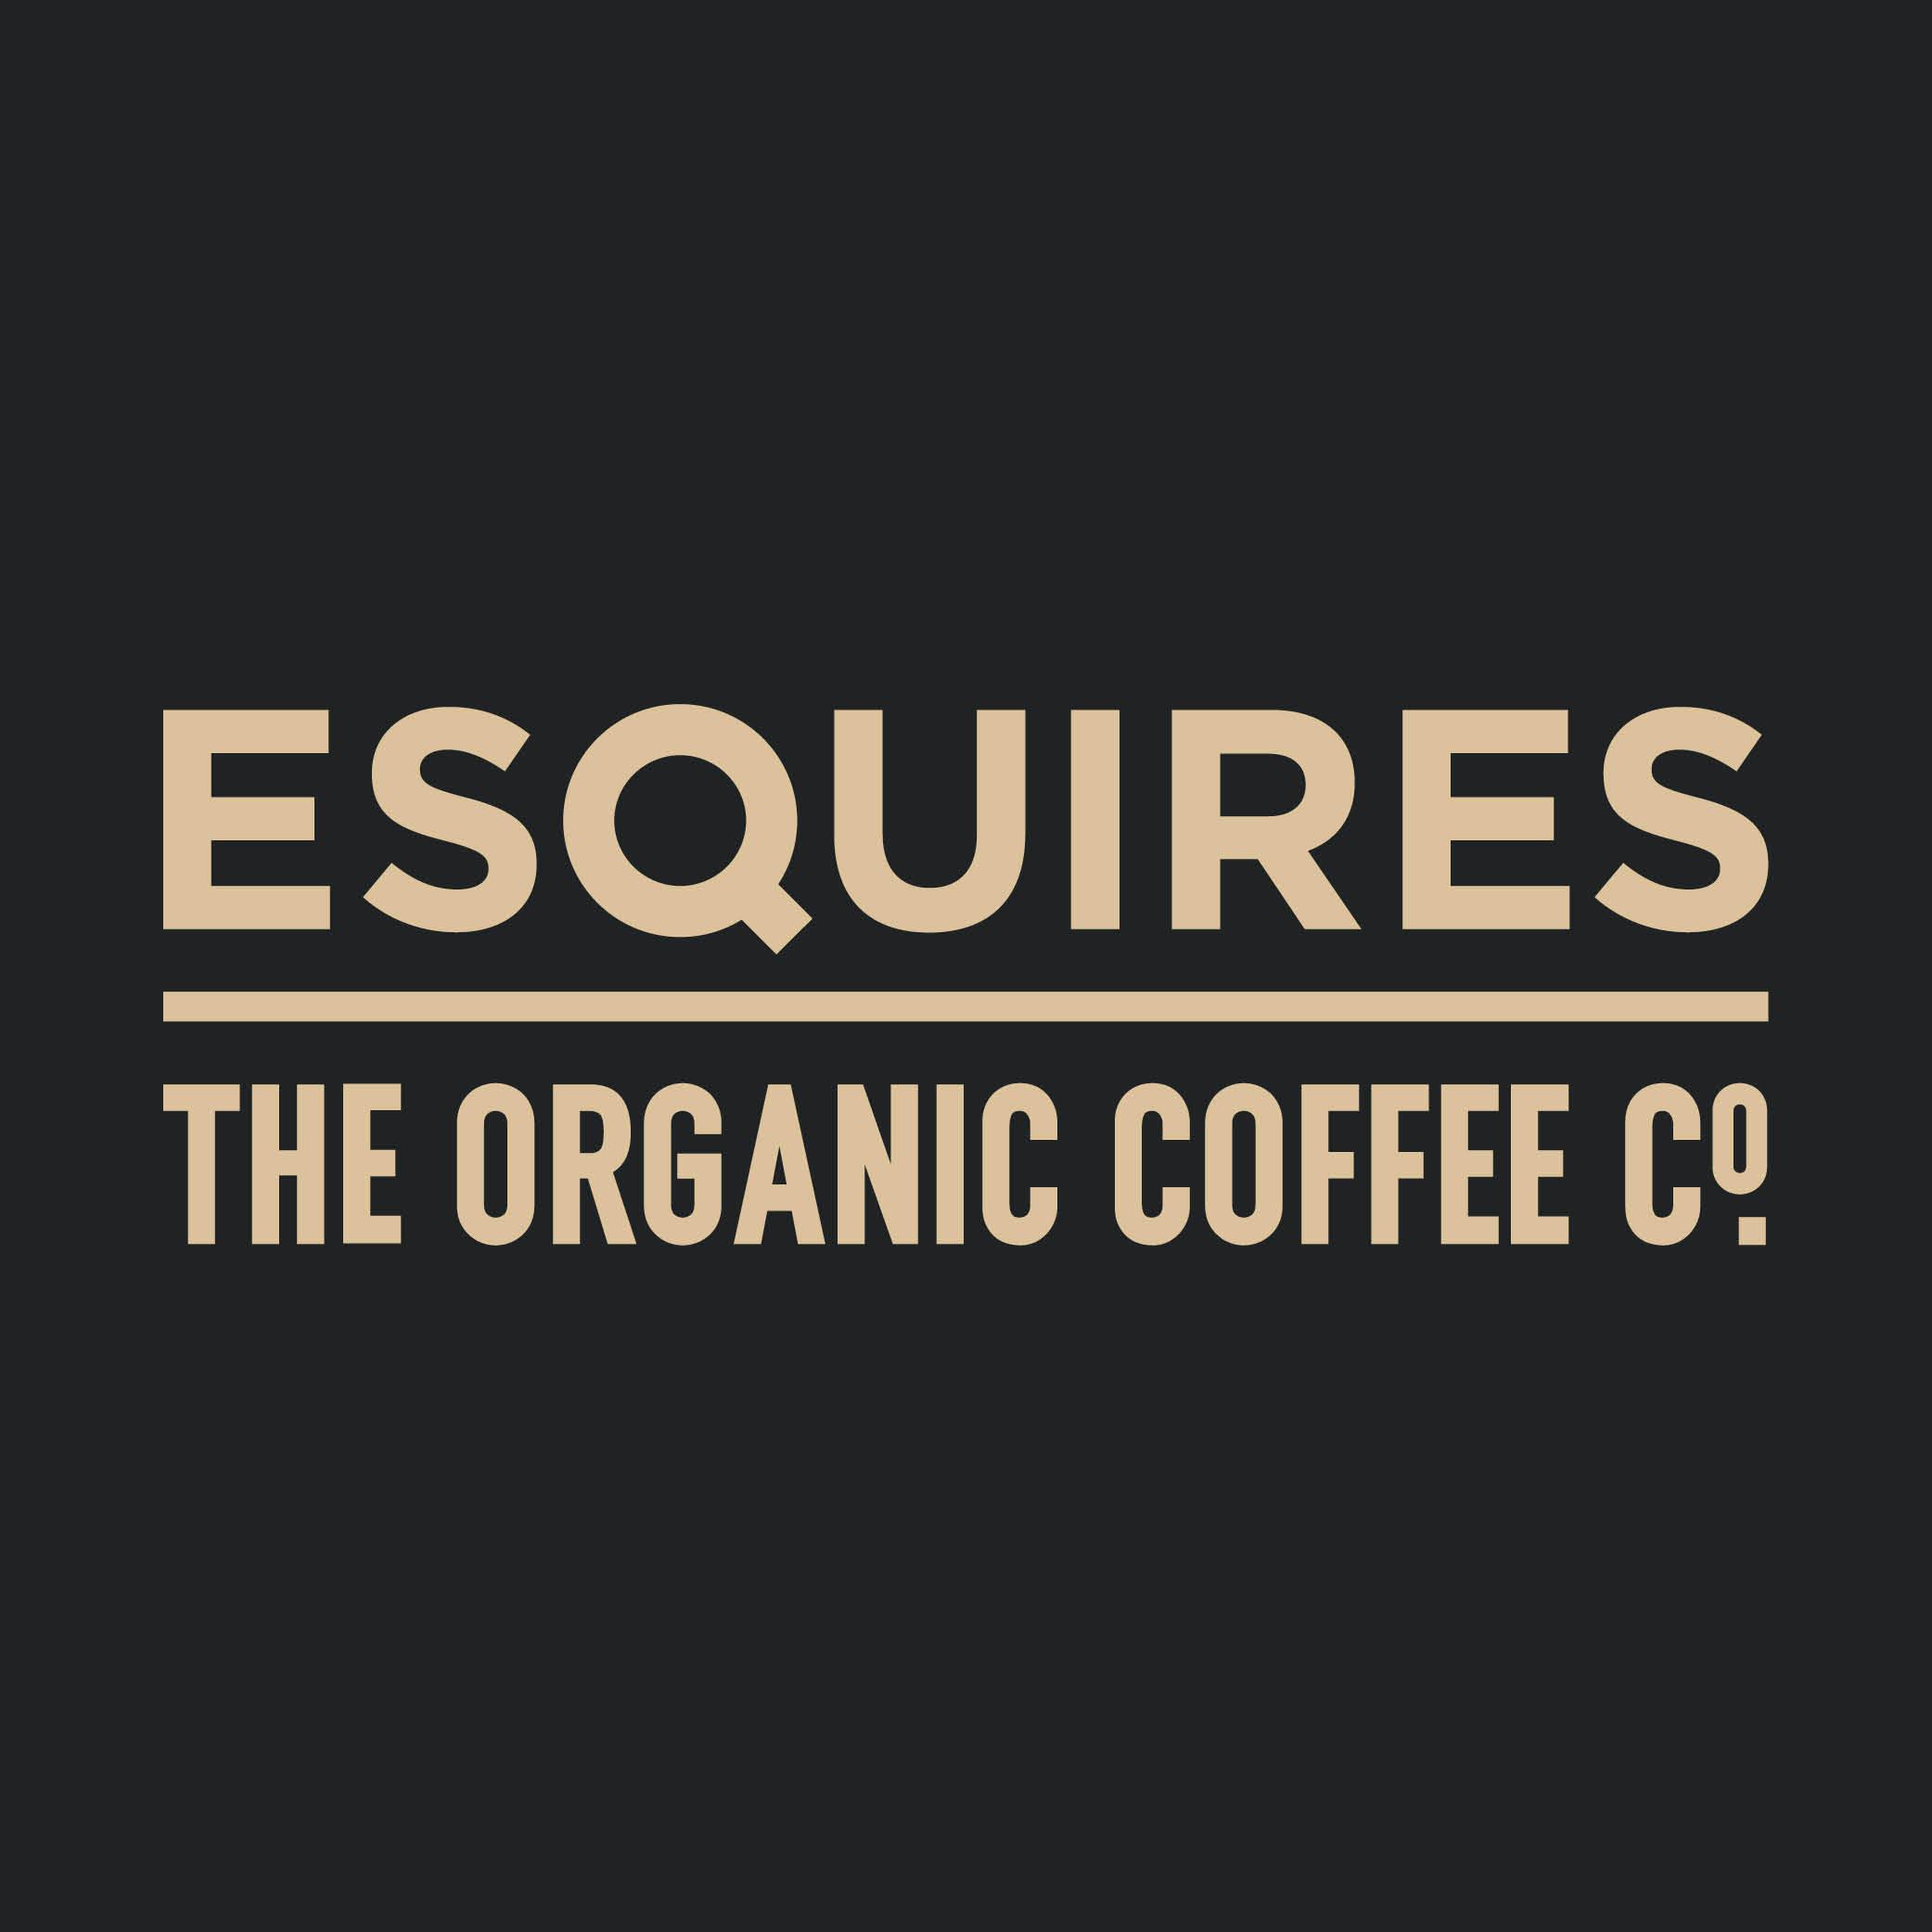 Esquires Coffee Southend-on-Sea - Southend-on-Sea, Essex SS2 5SP - 01702 392569 | ShowMeLocal.com